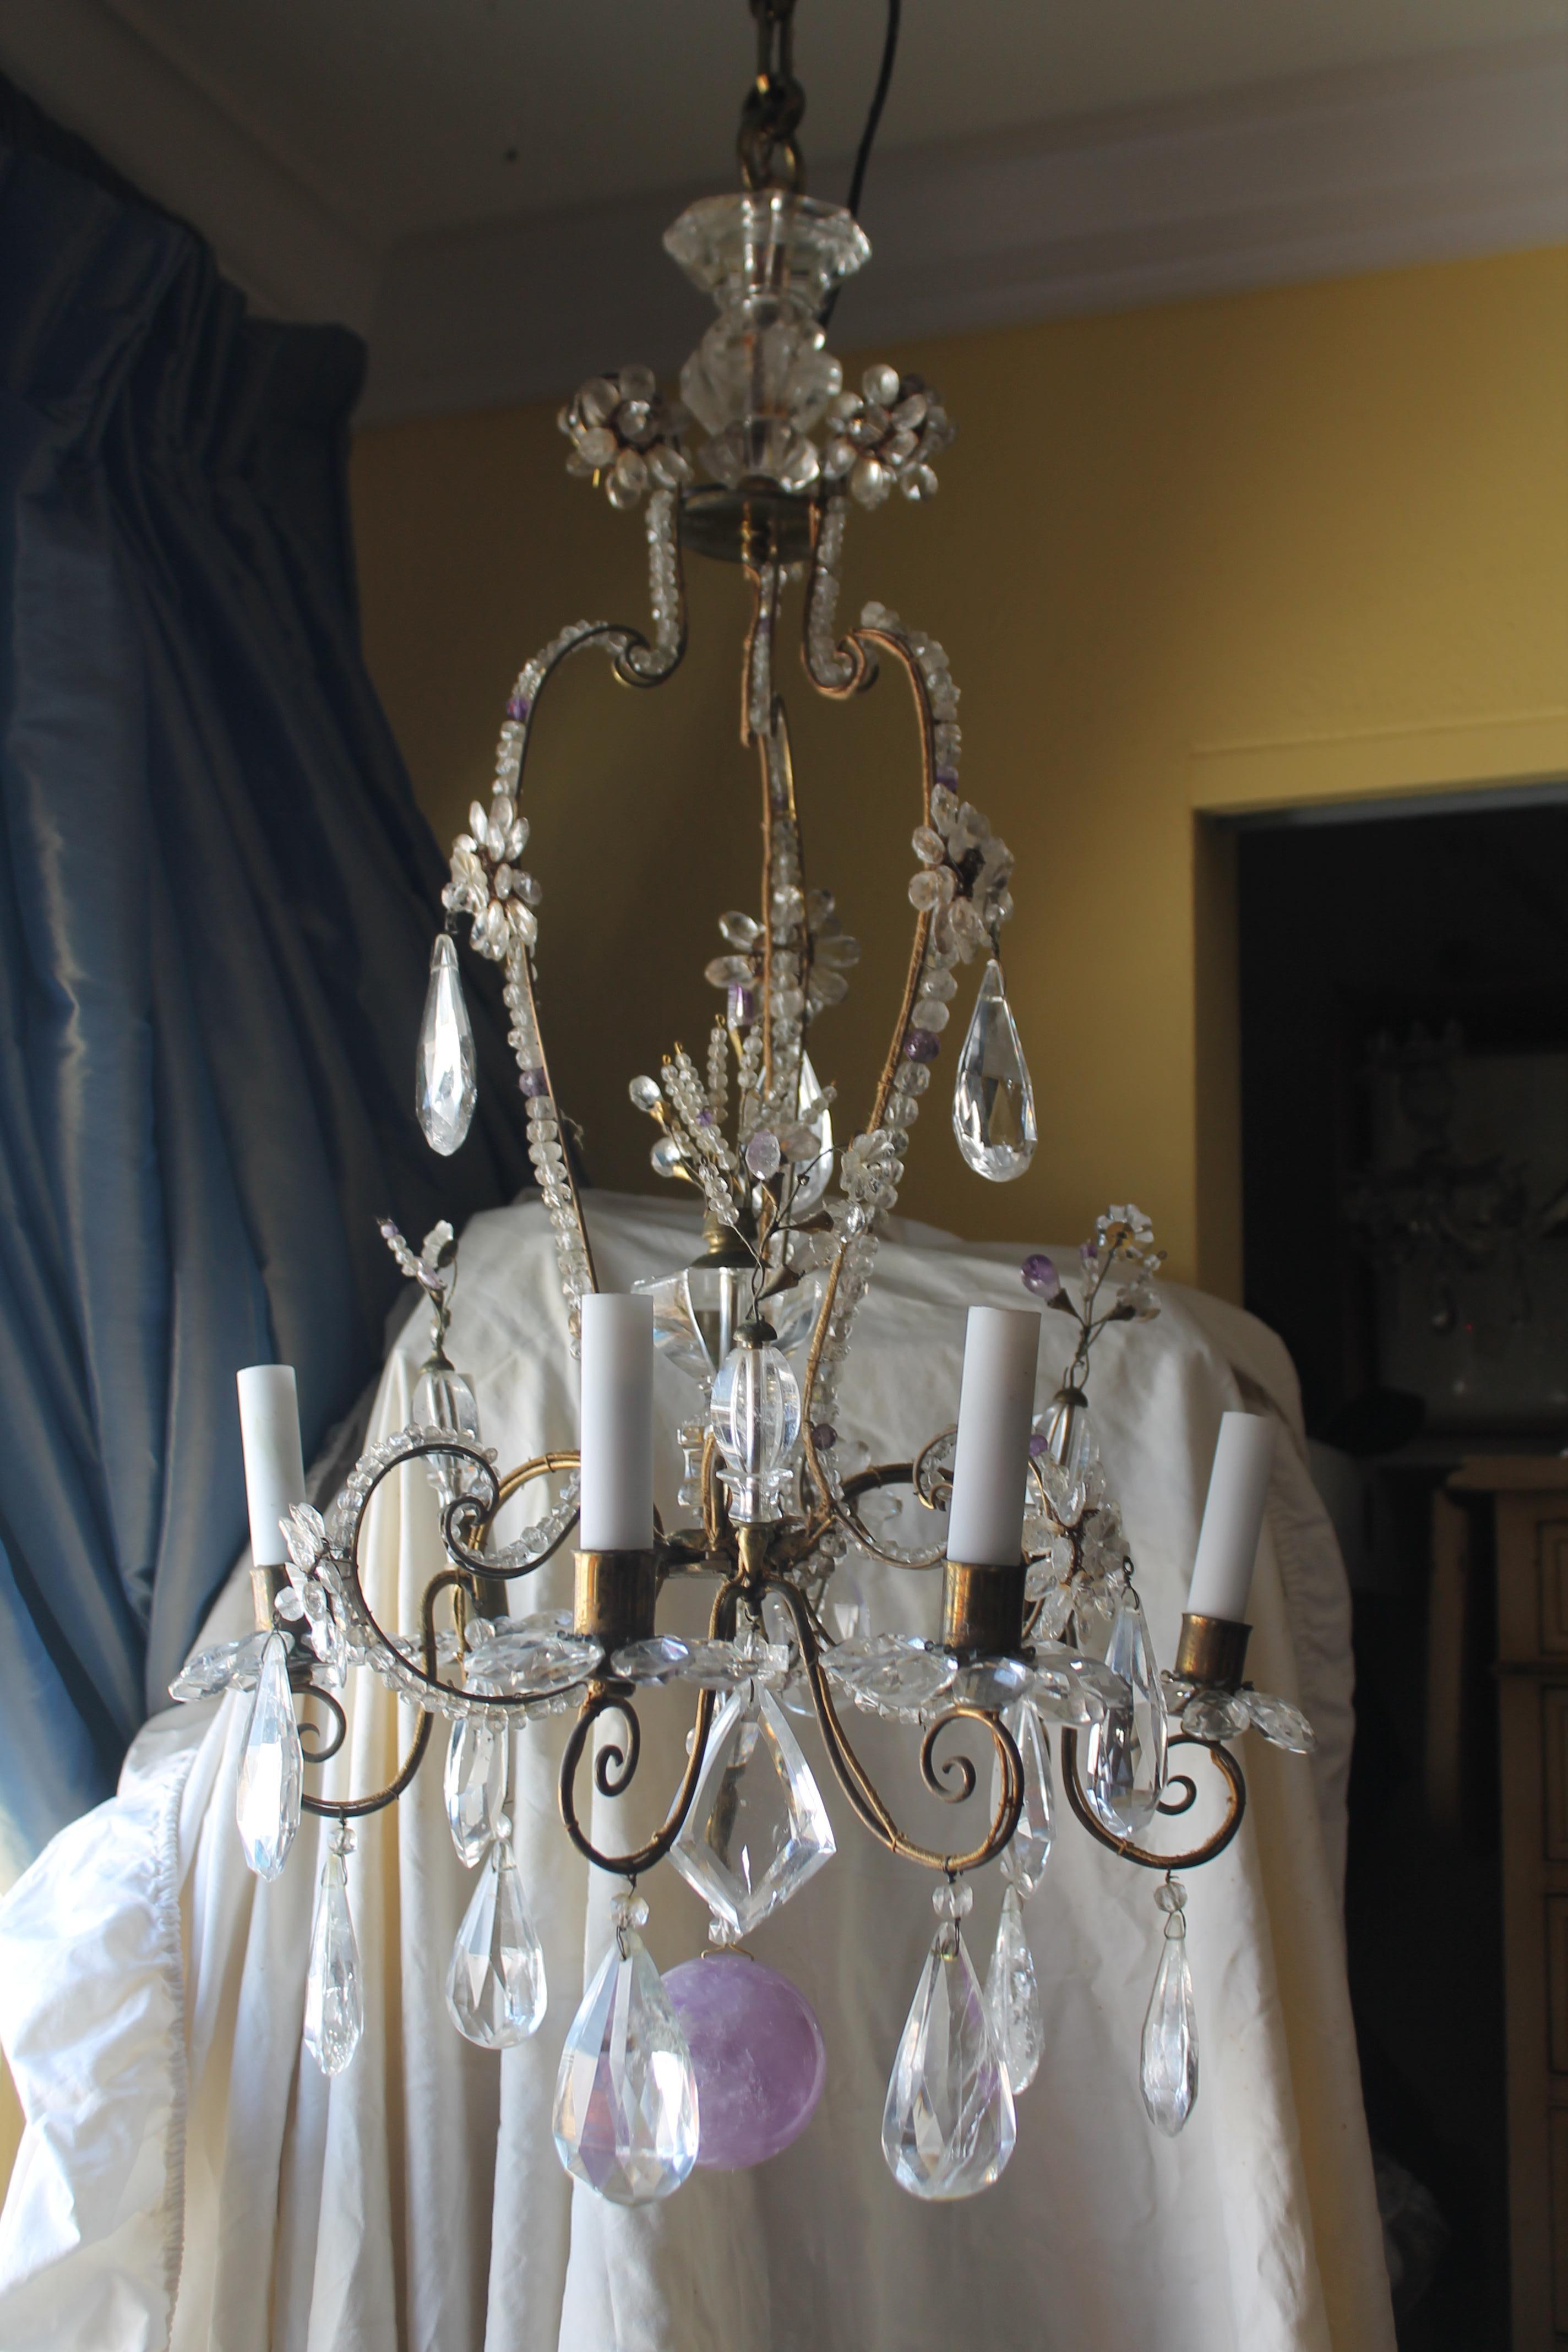 19thc French Louis XVI style Bronze Frame/ Rock Crystal Lantern Form Chandelier by Maison Bagues. Amethyst rock crystal accents. This is a highly detailed and quite ornate chandelier. There is rock crystal beaded Rococo lines, 4 vases of crystal